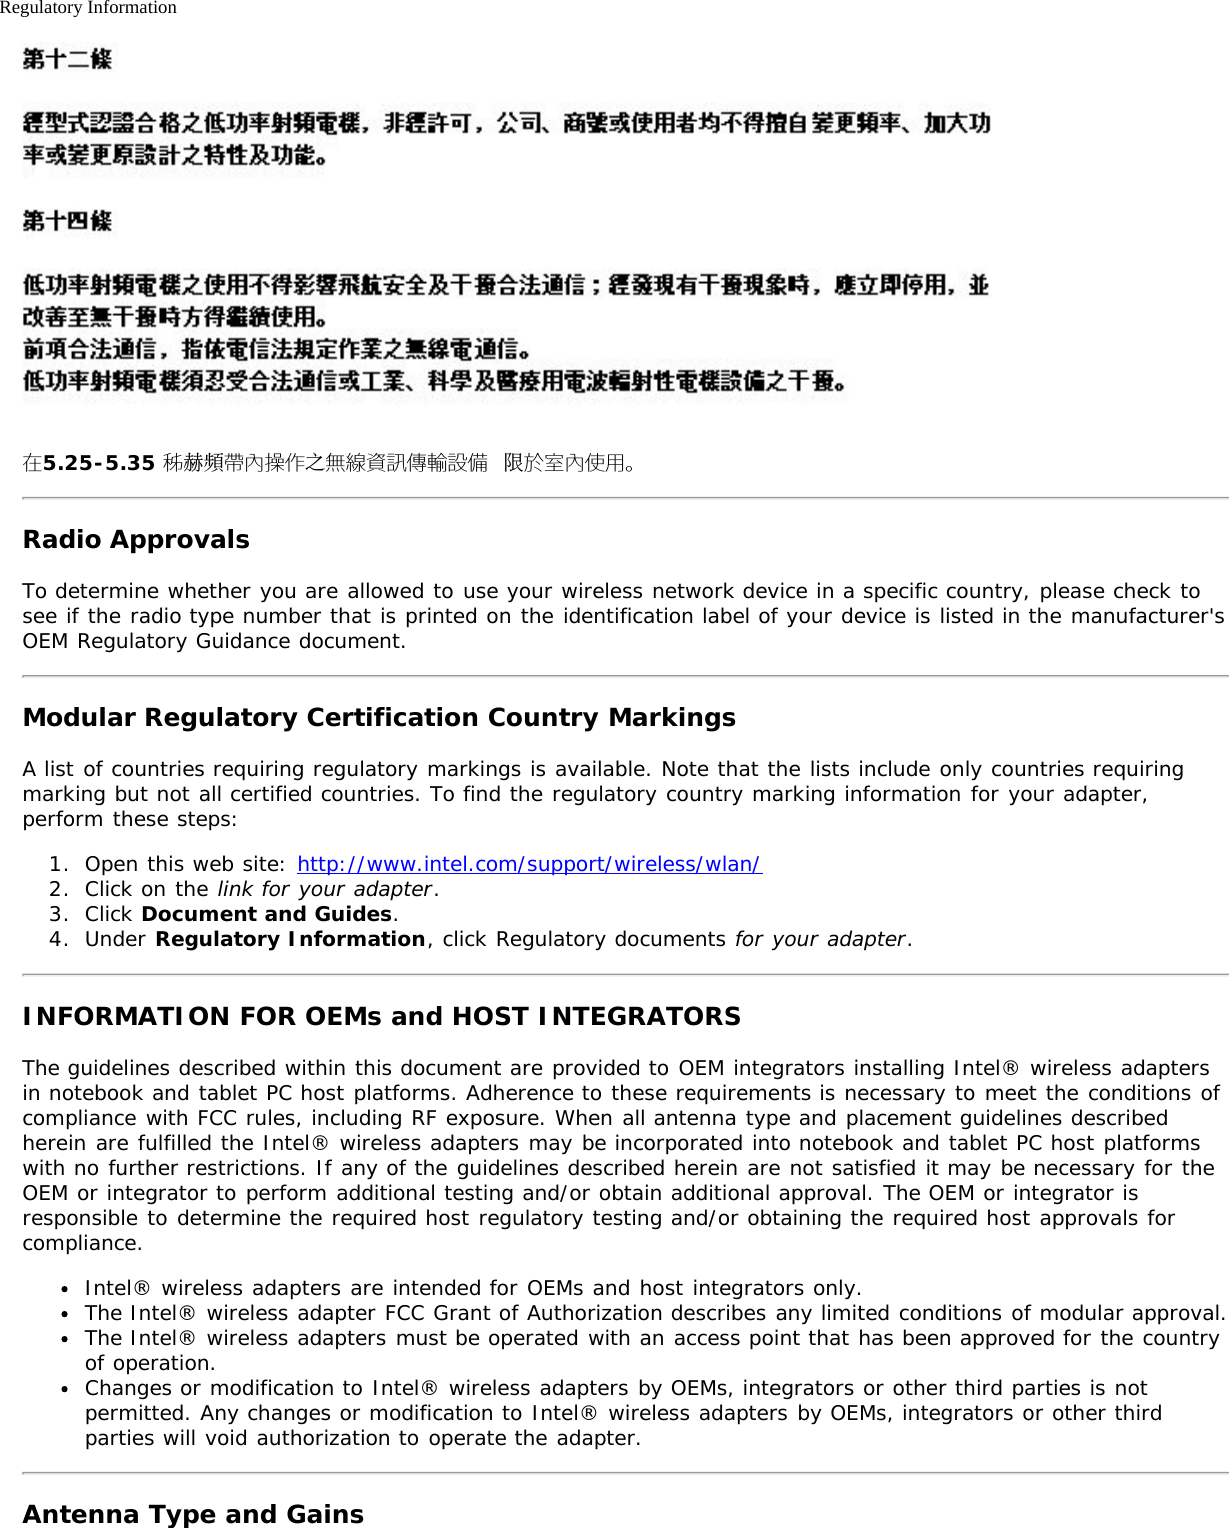 Regulatory Information在5.25-5.35 秭赫頻帶內操作之無線資訊傳輸設備 限於室內使用。Radio ApprovalsTo determine whether you are allowed to use your wireless network device in a specific country, please check tosee if the radio type number that is printed on the identification label of your device is listed in the manufacturer&apos;sOEM Regulatory Guidance document.Modular Regulatory Certification Country MarkingsA list of countries requiring regulatory markings is available. Note that the lists include only countries requiringmarking but not all certified countries. To find the regulatory country marking information for your adapter,perform these steps:1.  Open this web site: http://www.intel.com/support/wireless/wlan/2.  Click on the link for your adapter.3.  Click Document and Guides.4.  Under Regulatory Information, click Regulatory documents for your adapter.INFORMATION FOR OEMs and HOST INTEGRATORSThe guidelines described within this document are provided to OEM integrators installing Intel® wireless adaptersin notebook and tablet PC host platforms. Adherence to these requirements is necessary to meet the conditions ofcompliance with FCC rules, including RF exposure. When all antenna type and placement guidelines describedherein are fulfilled the Intel® wireless adapters may be incorporated into notebook and tablet PC host platformswith no further restrictions. If any of the guidelines described herein are not satisfied it may be necessary for theOEM or integrator to perform additional testing and/or obtain additional approval. The OEM or integrator isresponsible to determine the required host regulatory testing and/or obtaining the required host approvals forcompliance.Intel® wireless adapters are intended for OEMs and host integrators only.The Intel® wireless adapter FCC Grant of Authorization describes any limited conditions of modular approval.The Intel® wireless adapters must be operated with an access point that has been approved for the countryof operation.Changes or modification to Intel® wireless adapters by OEMs, integrators or other third parties is notpermitted. Any changes or modification to Intel® wireless adapters by OEMs, integrators or other thirdparties will void authorization to operate the adapter.Antenna Type and Gains